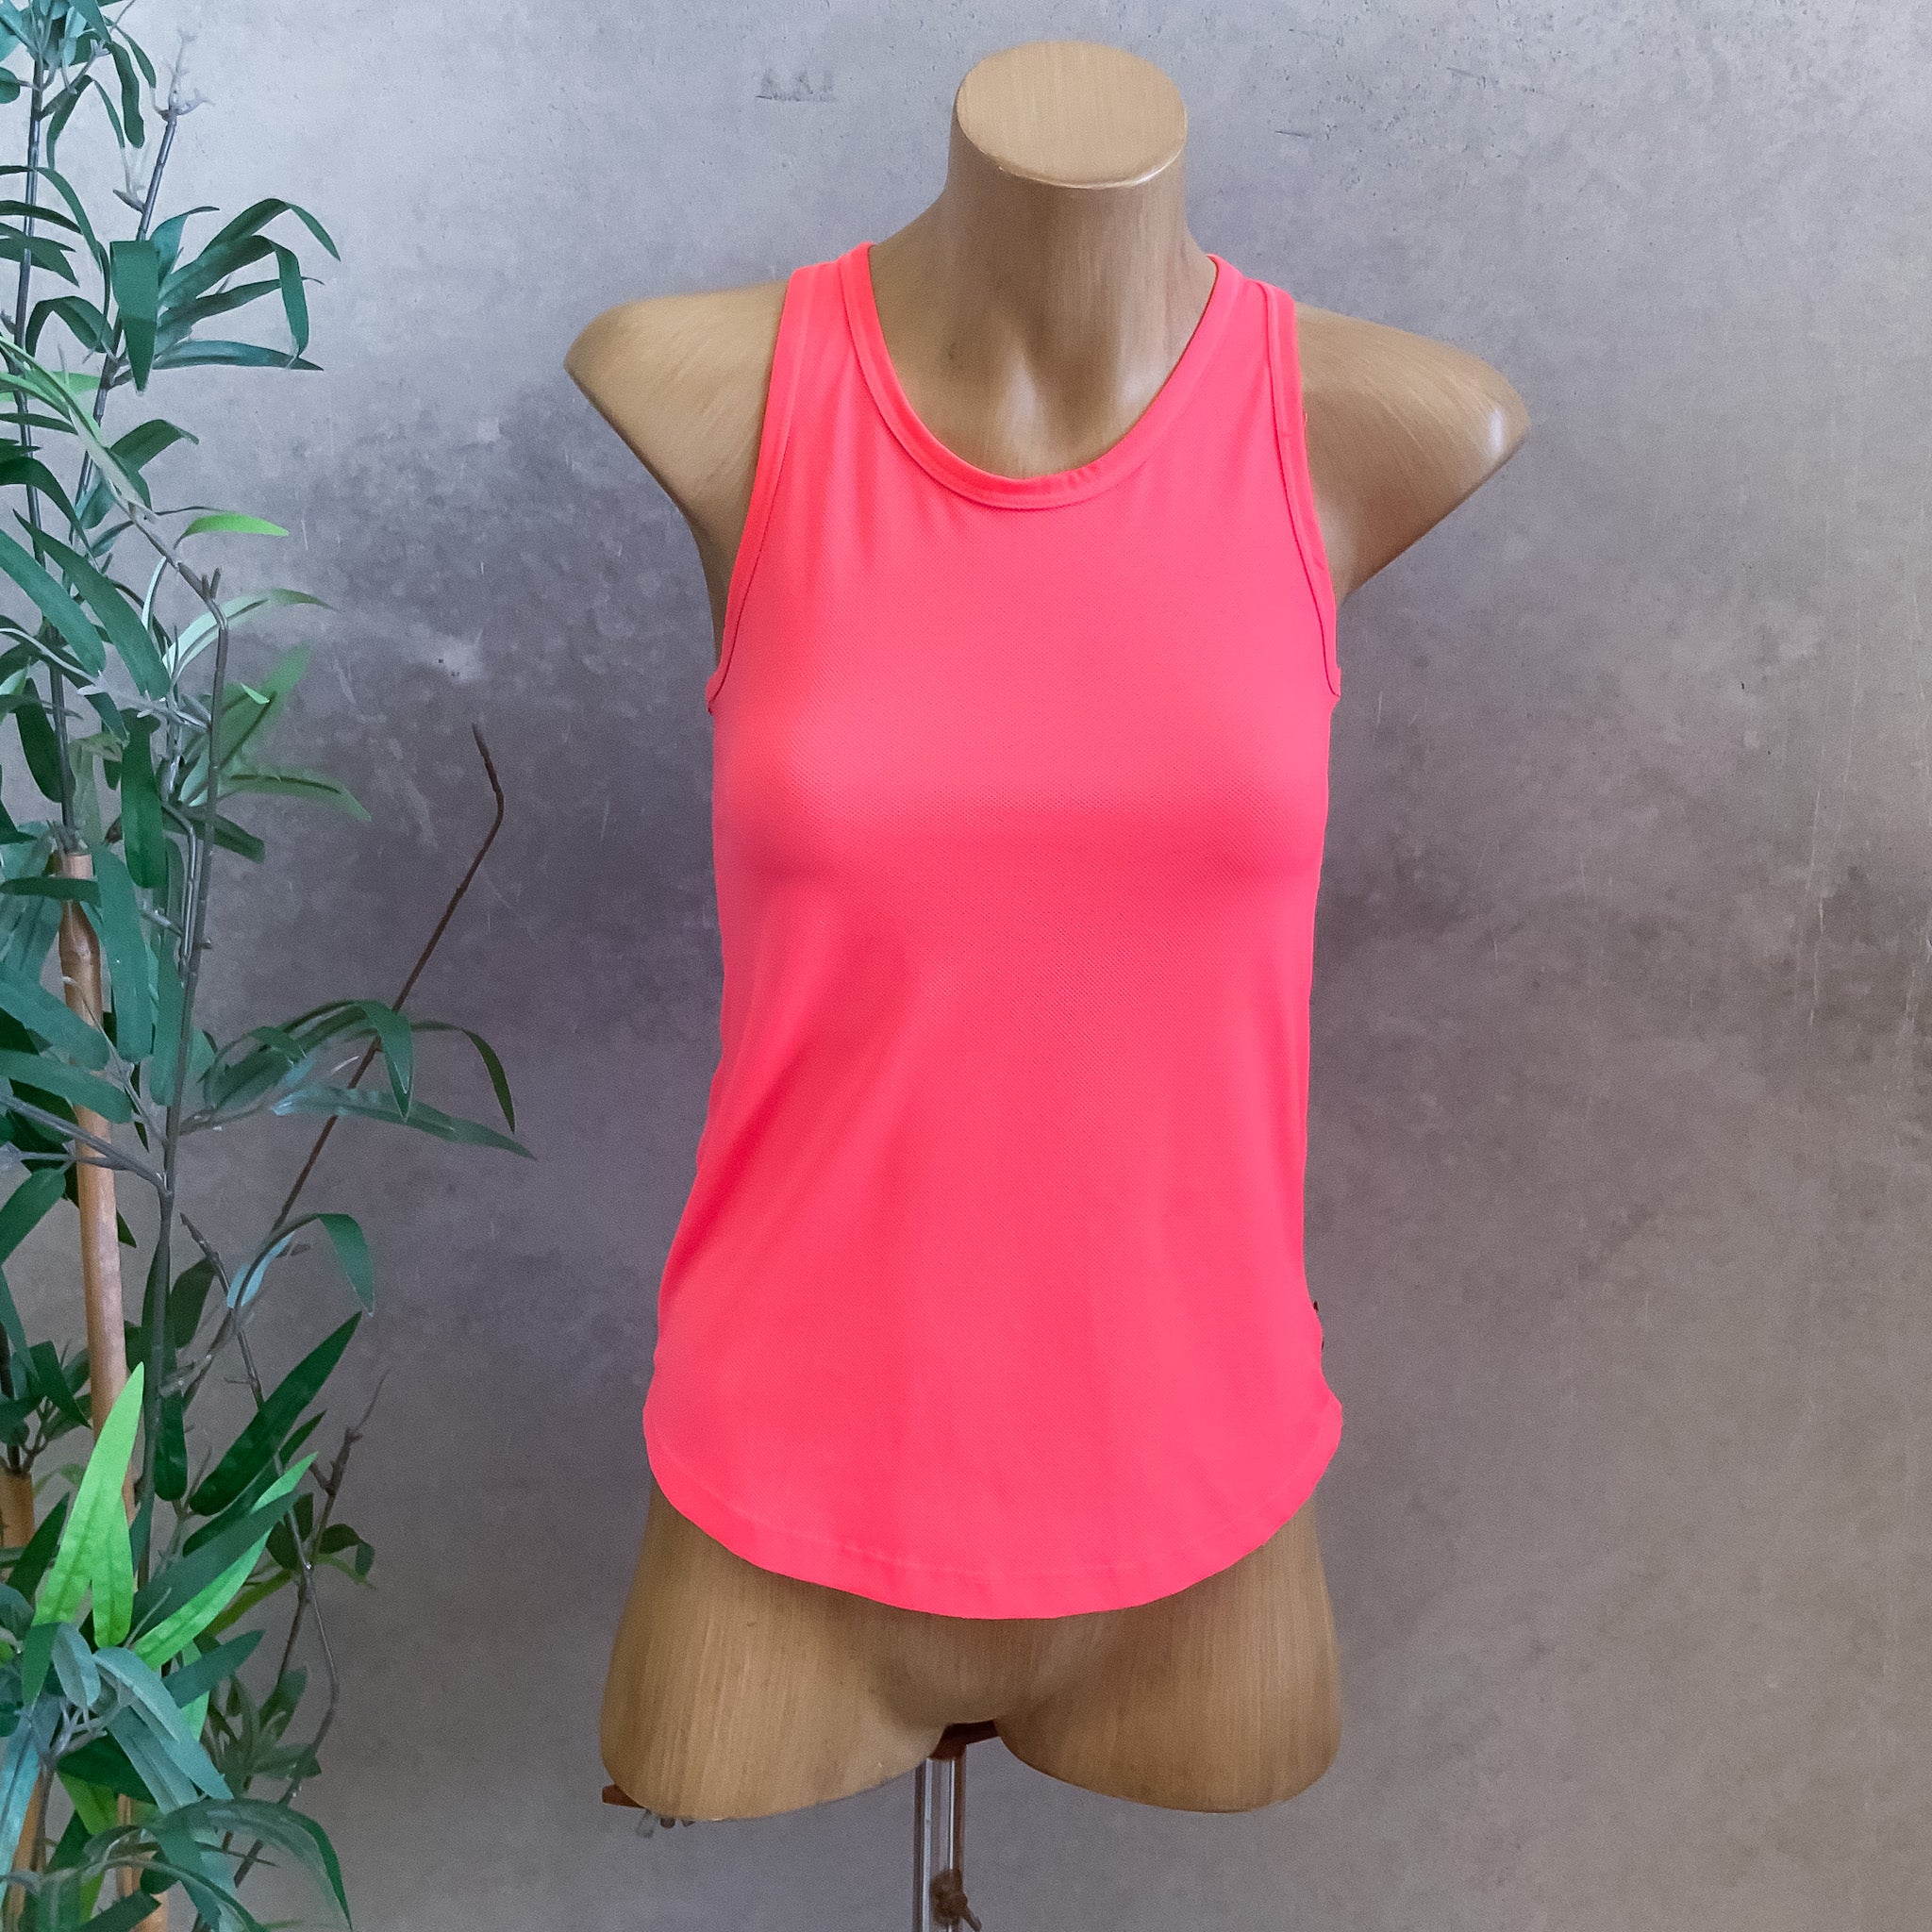 BONDS Pink Racerback Fitted Active Wear Tank Top - Size 8/10